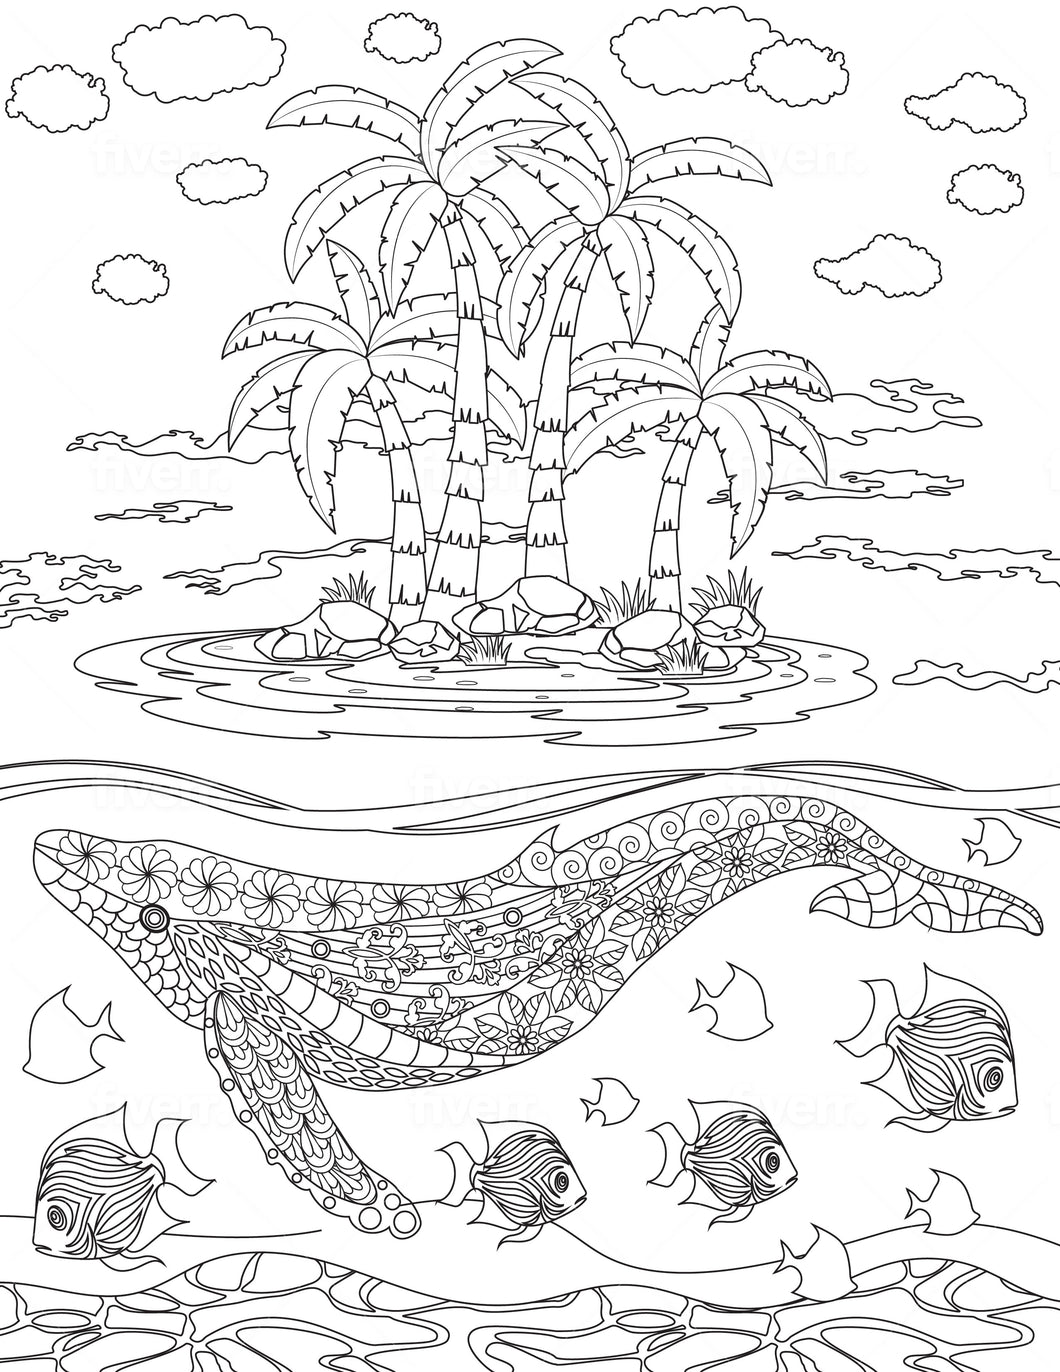 Whale Coloring Sheet - Goin Postal Brentwood